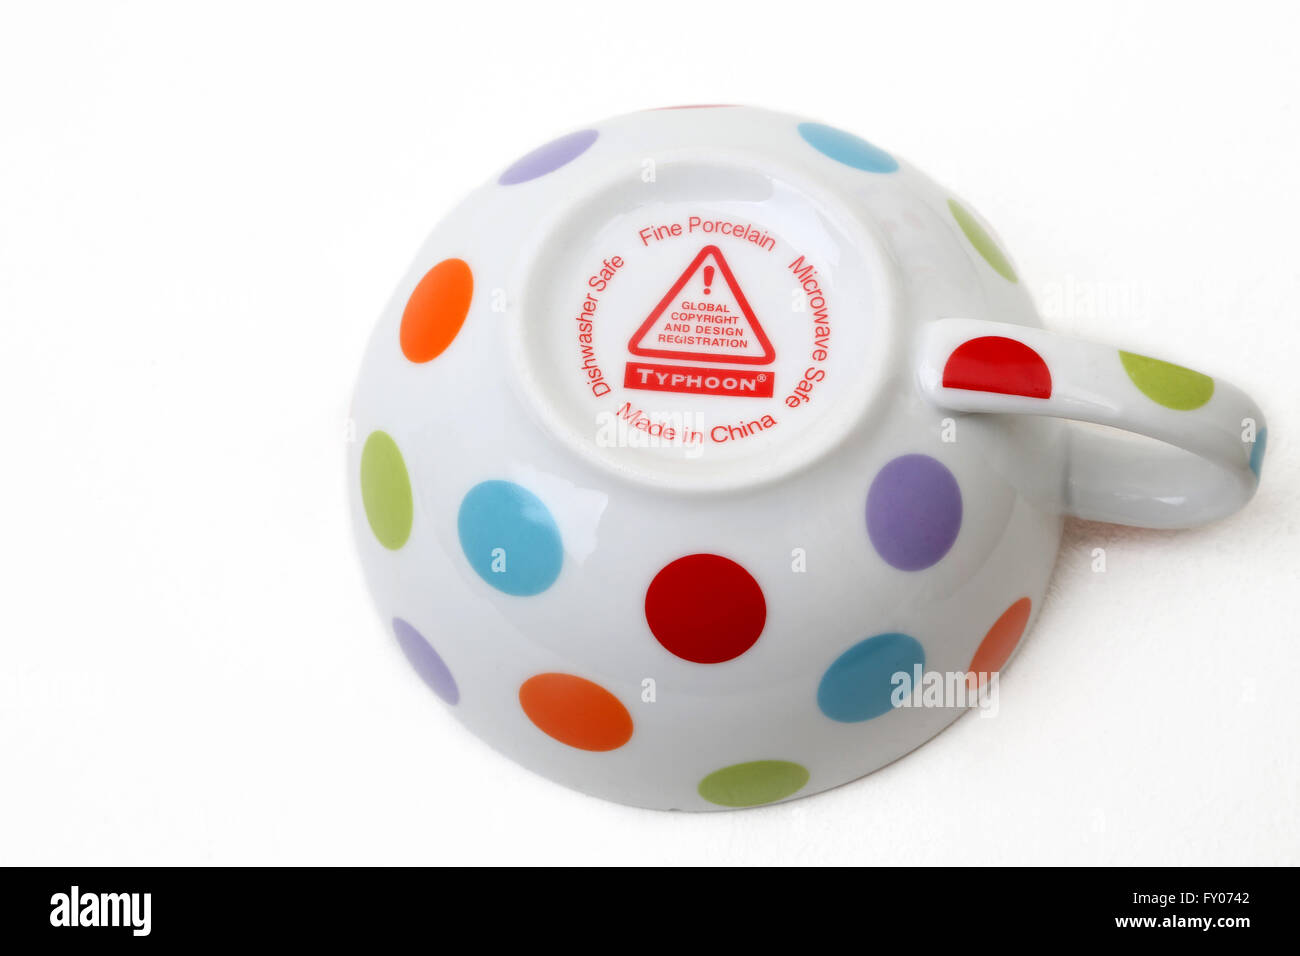 Typhoon Fine Porcelain Cup With Polka Dot Design Stock Photo - Alamy